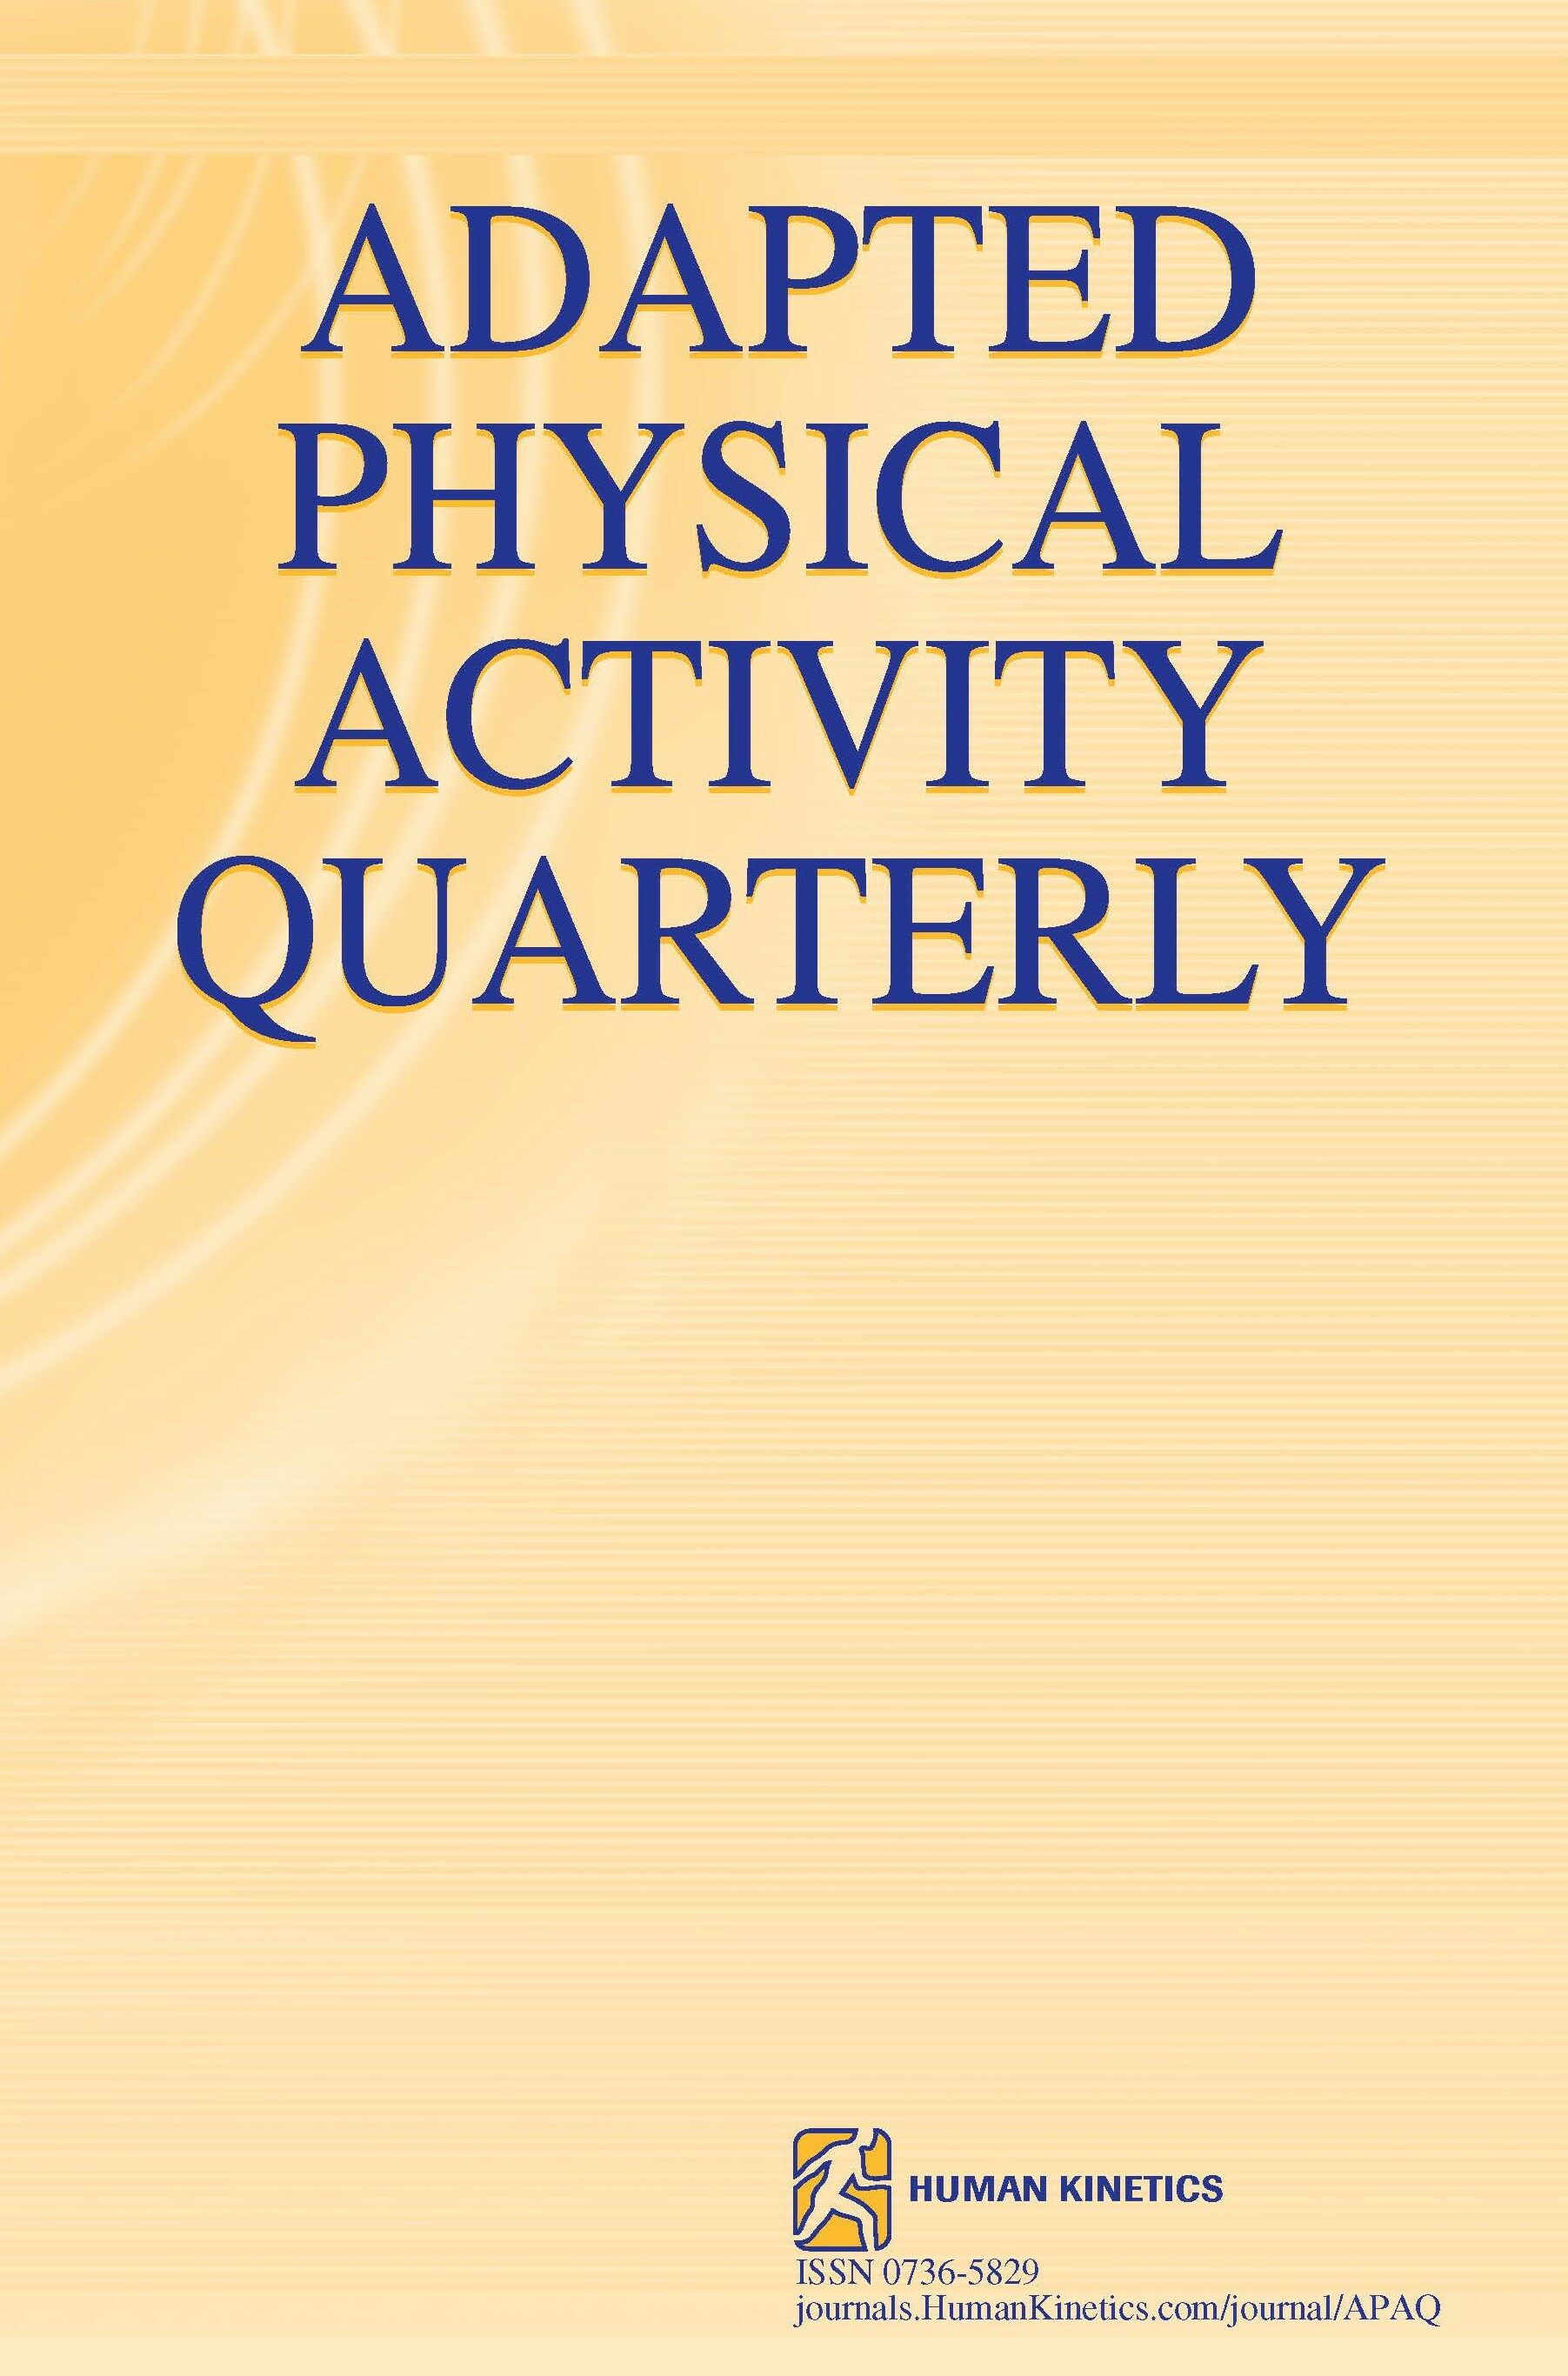 Feasibility of Using Q-Sort to Map Conditional Participation in Physical Activity in Adolescents With Autism Spectrum Disorder